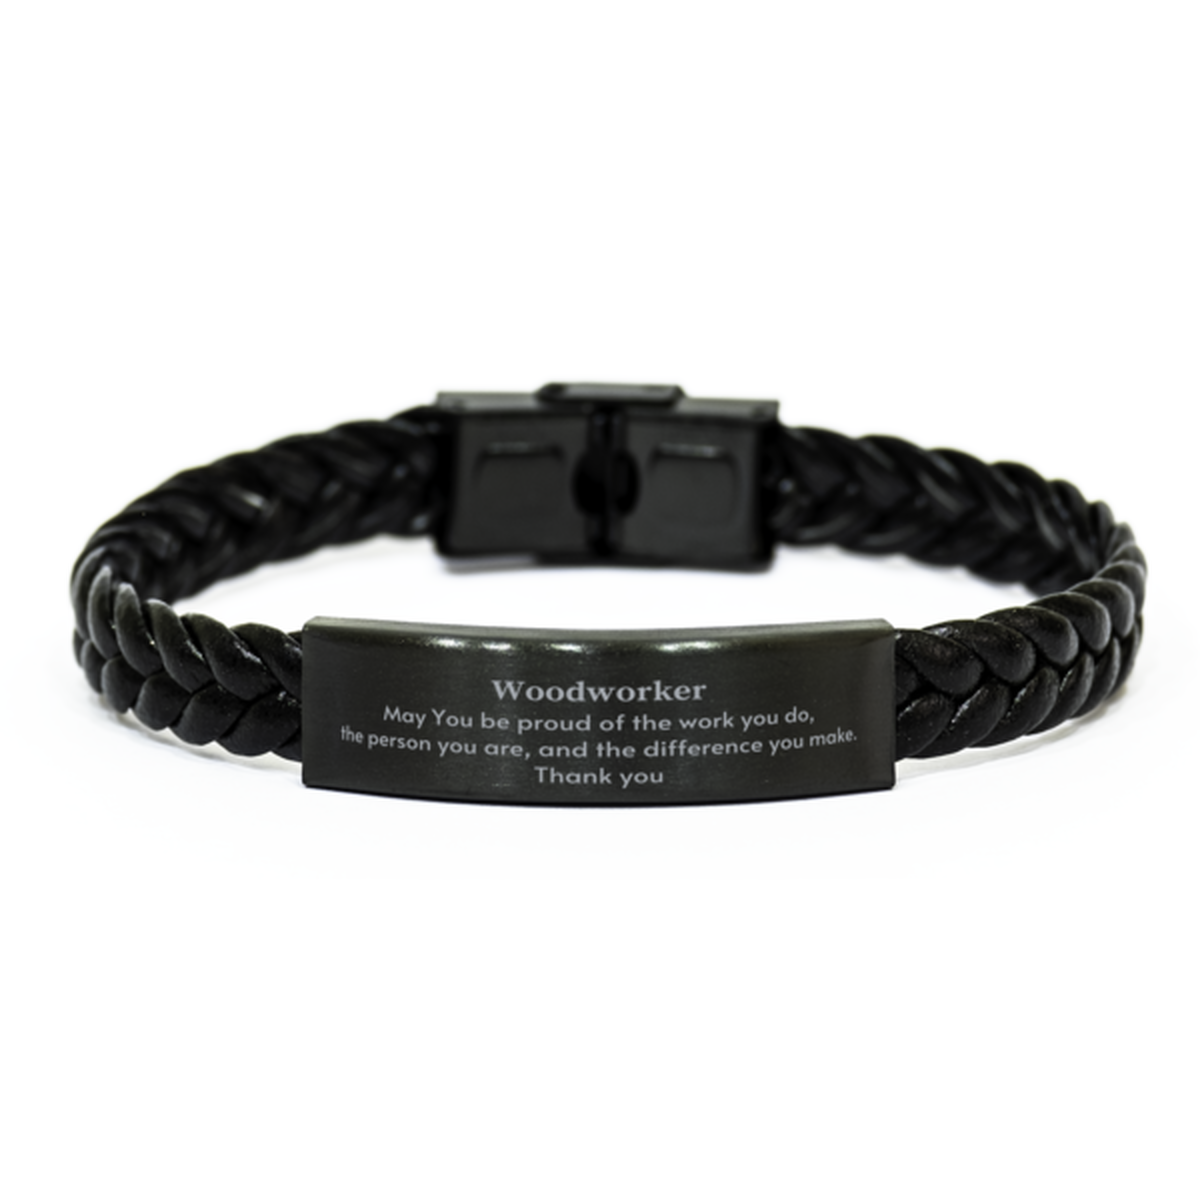 Heartwarming Braided Leather Bracelet Retirement Coworkers Gifts for Woodworker, Woodworker May You be proud of the work you do, the person you are Gifts for Boss Men Women Friends